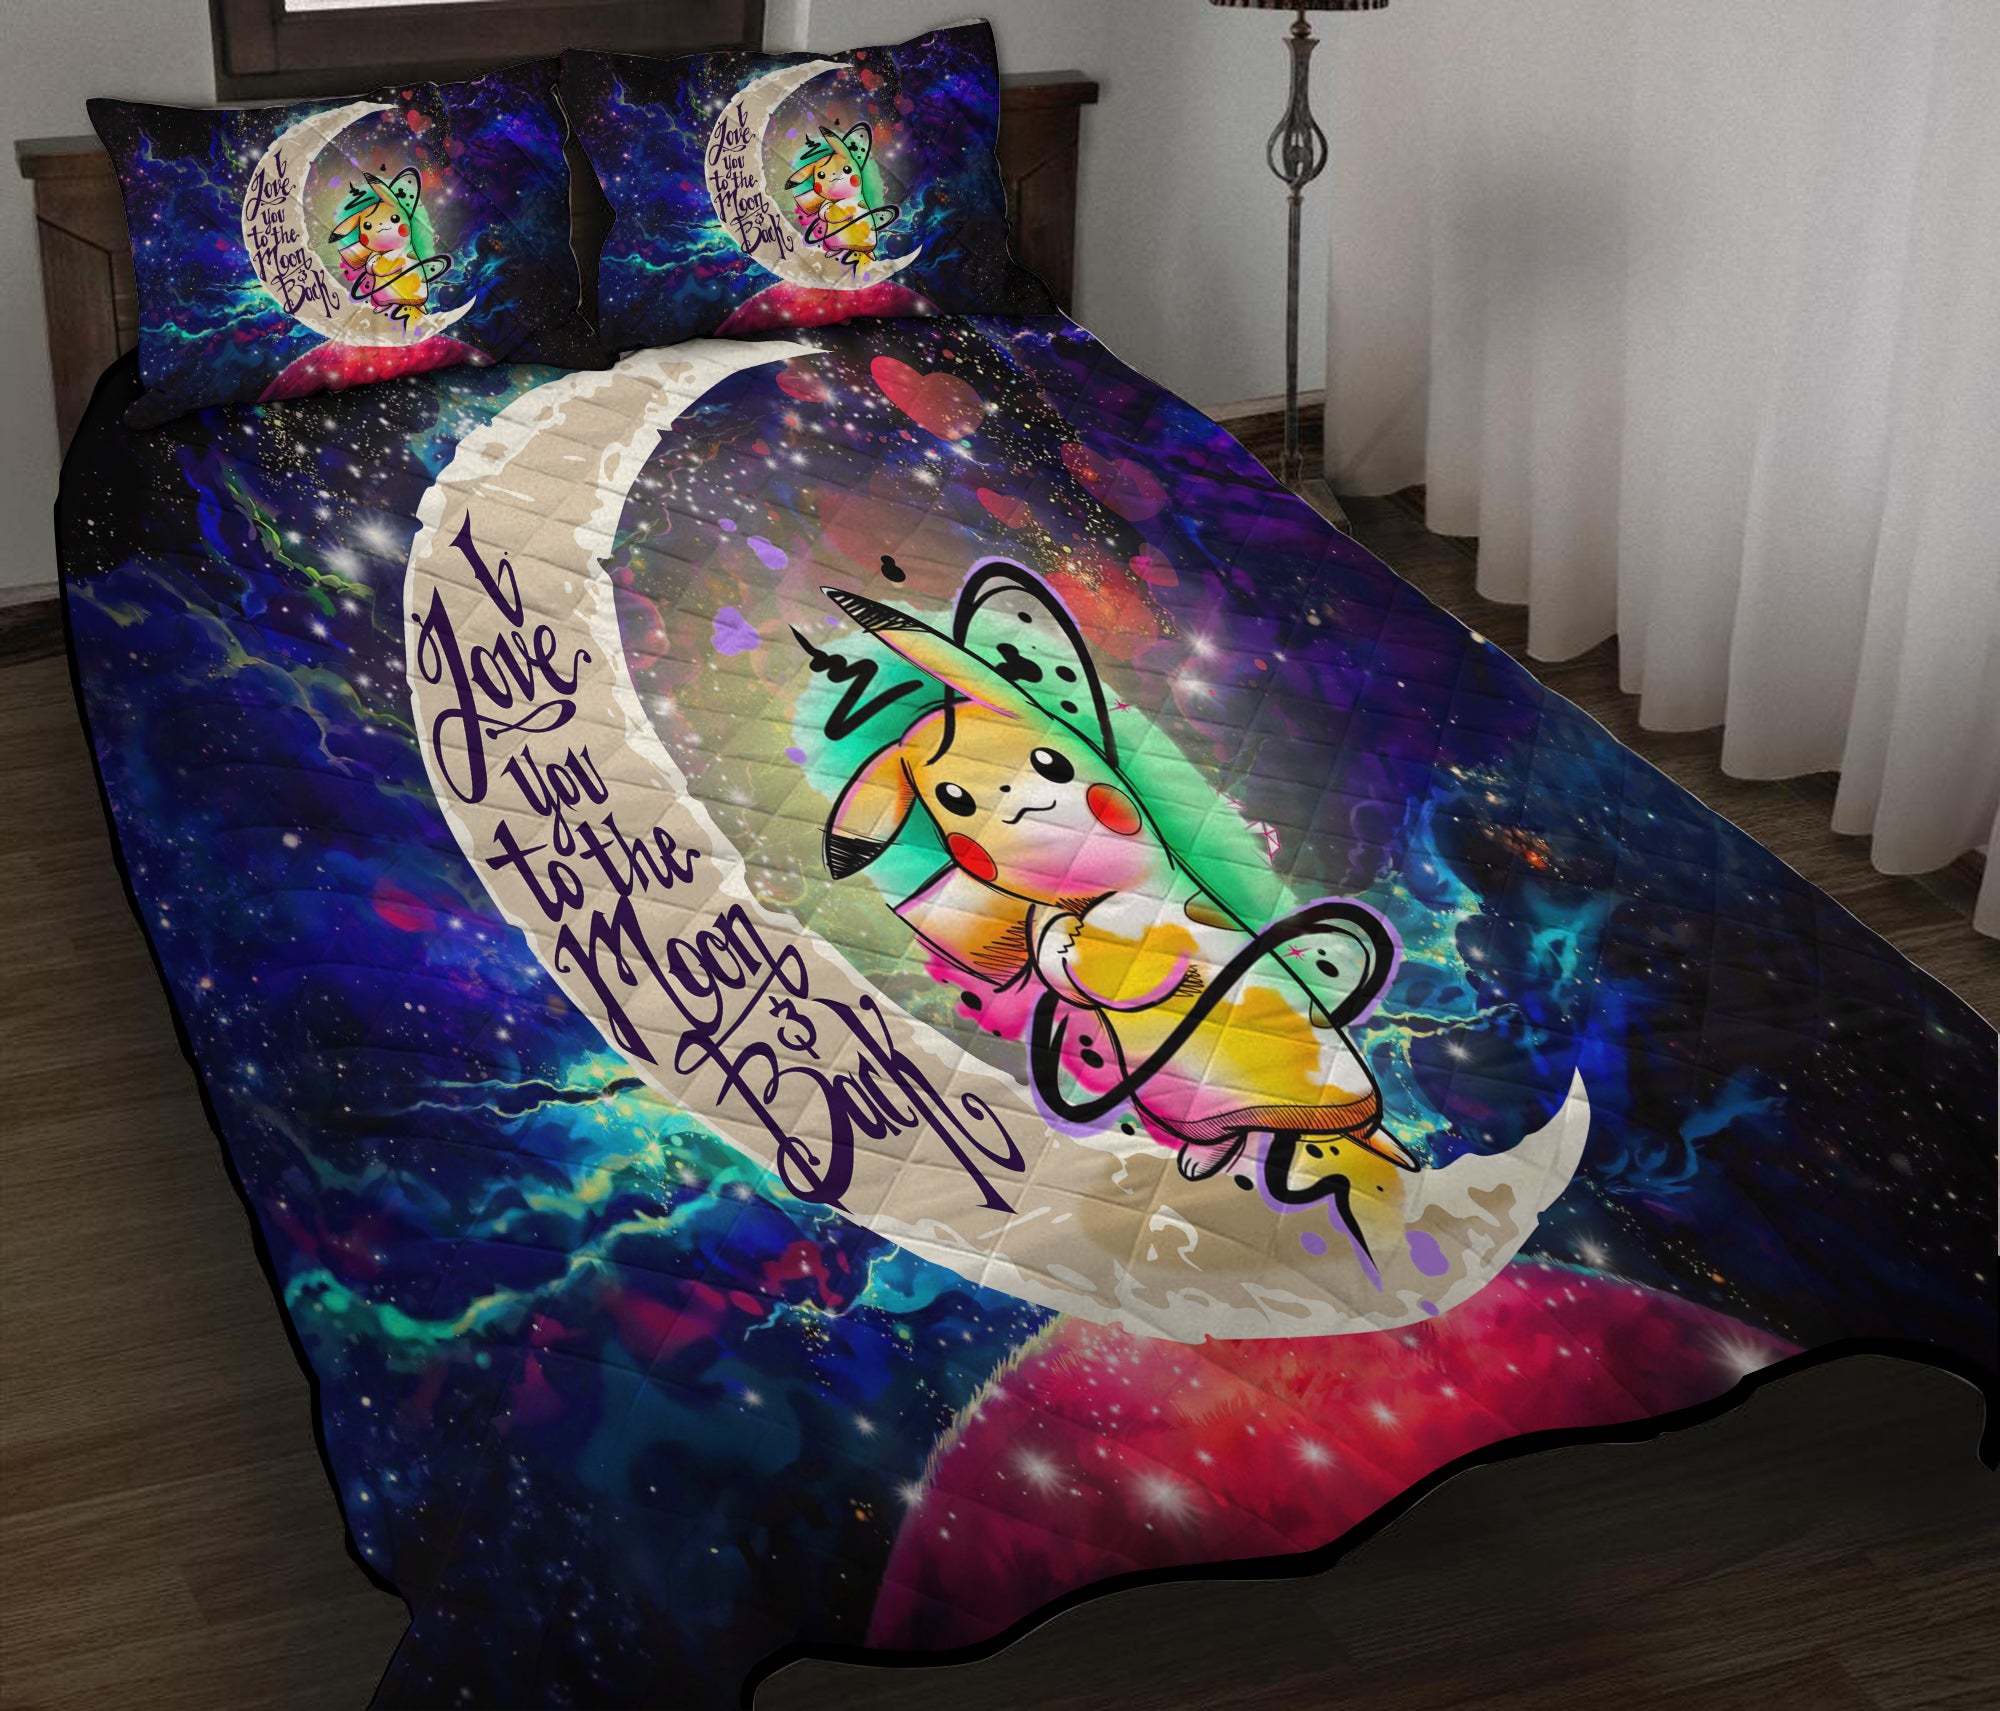 Pikachu Color Love You To The Moon Galaxy Quilt Bed Sets Nearkii